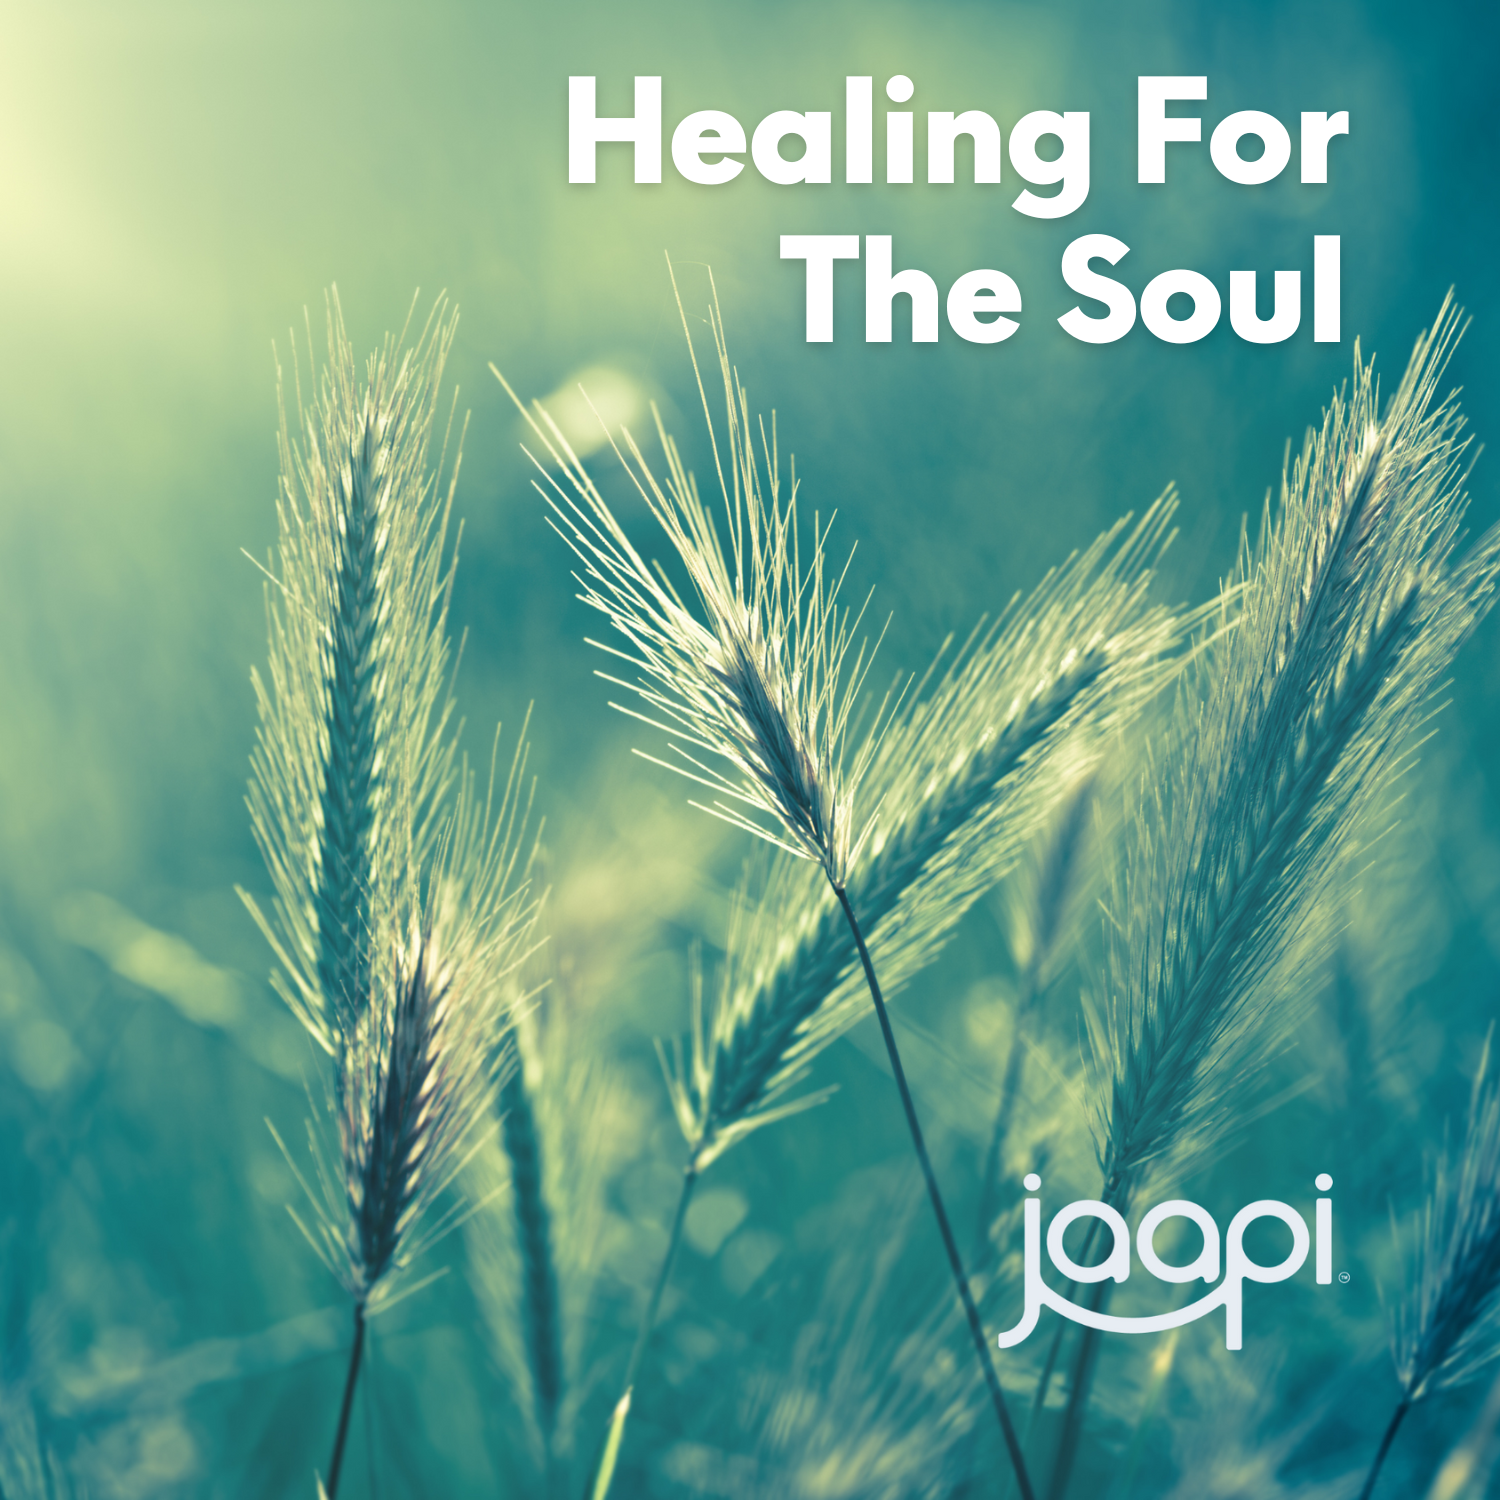 Healing for the Soul: Deep healing music from some of my favorites. Curated by Jaapi Media.